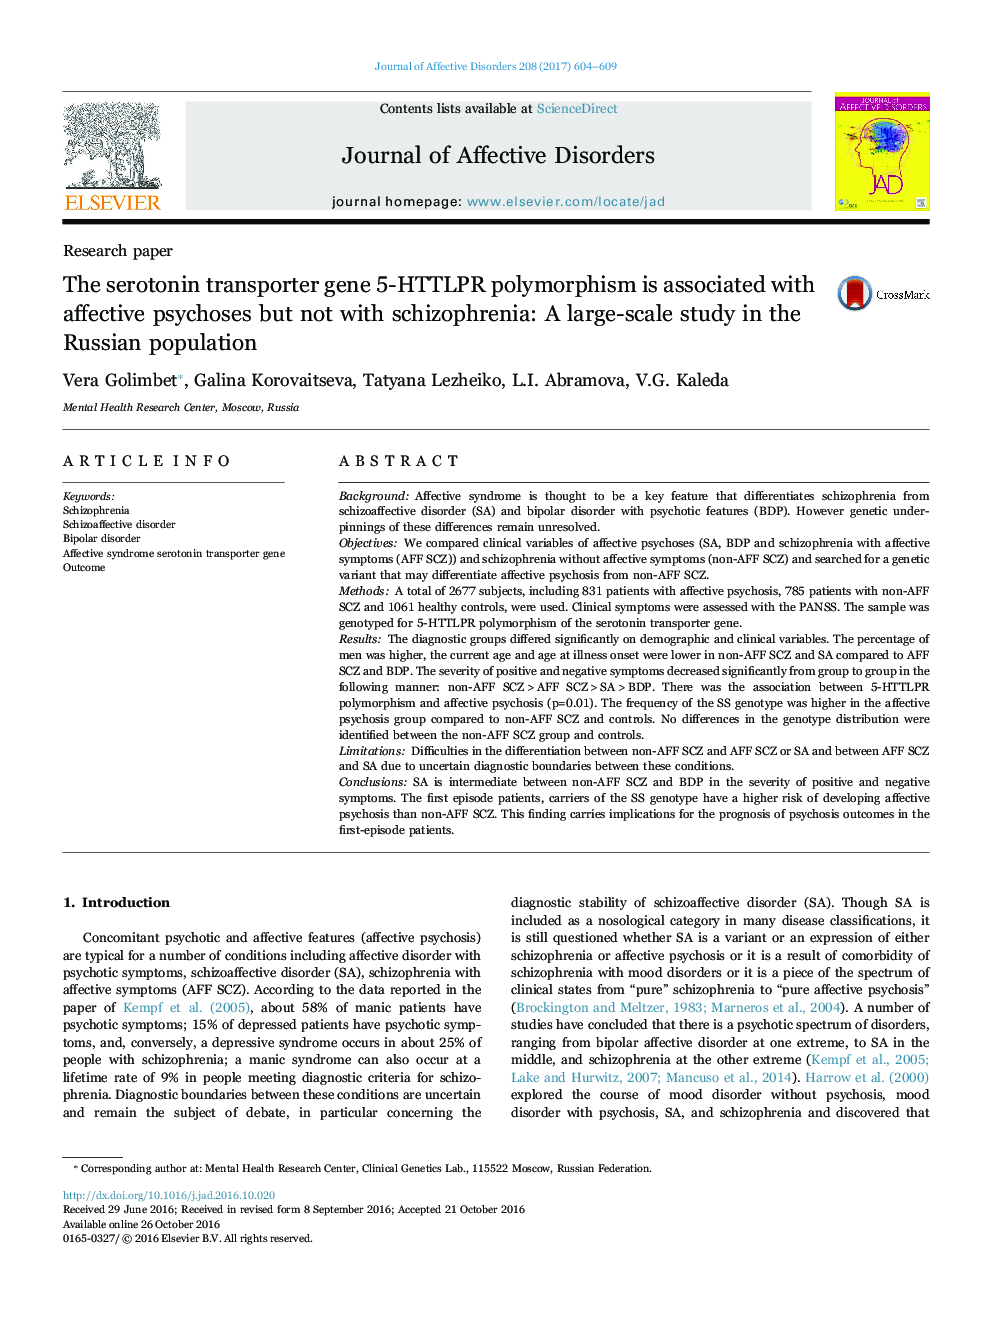 Research paperThe serotonin transporter gene 5-HTTLPR polymorphism is associated with affective psychoses but not with schizophrenia: A large-scale study in the Russian population